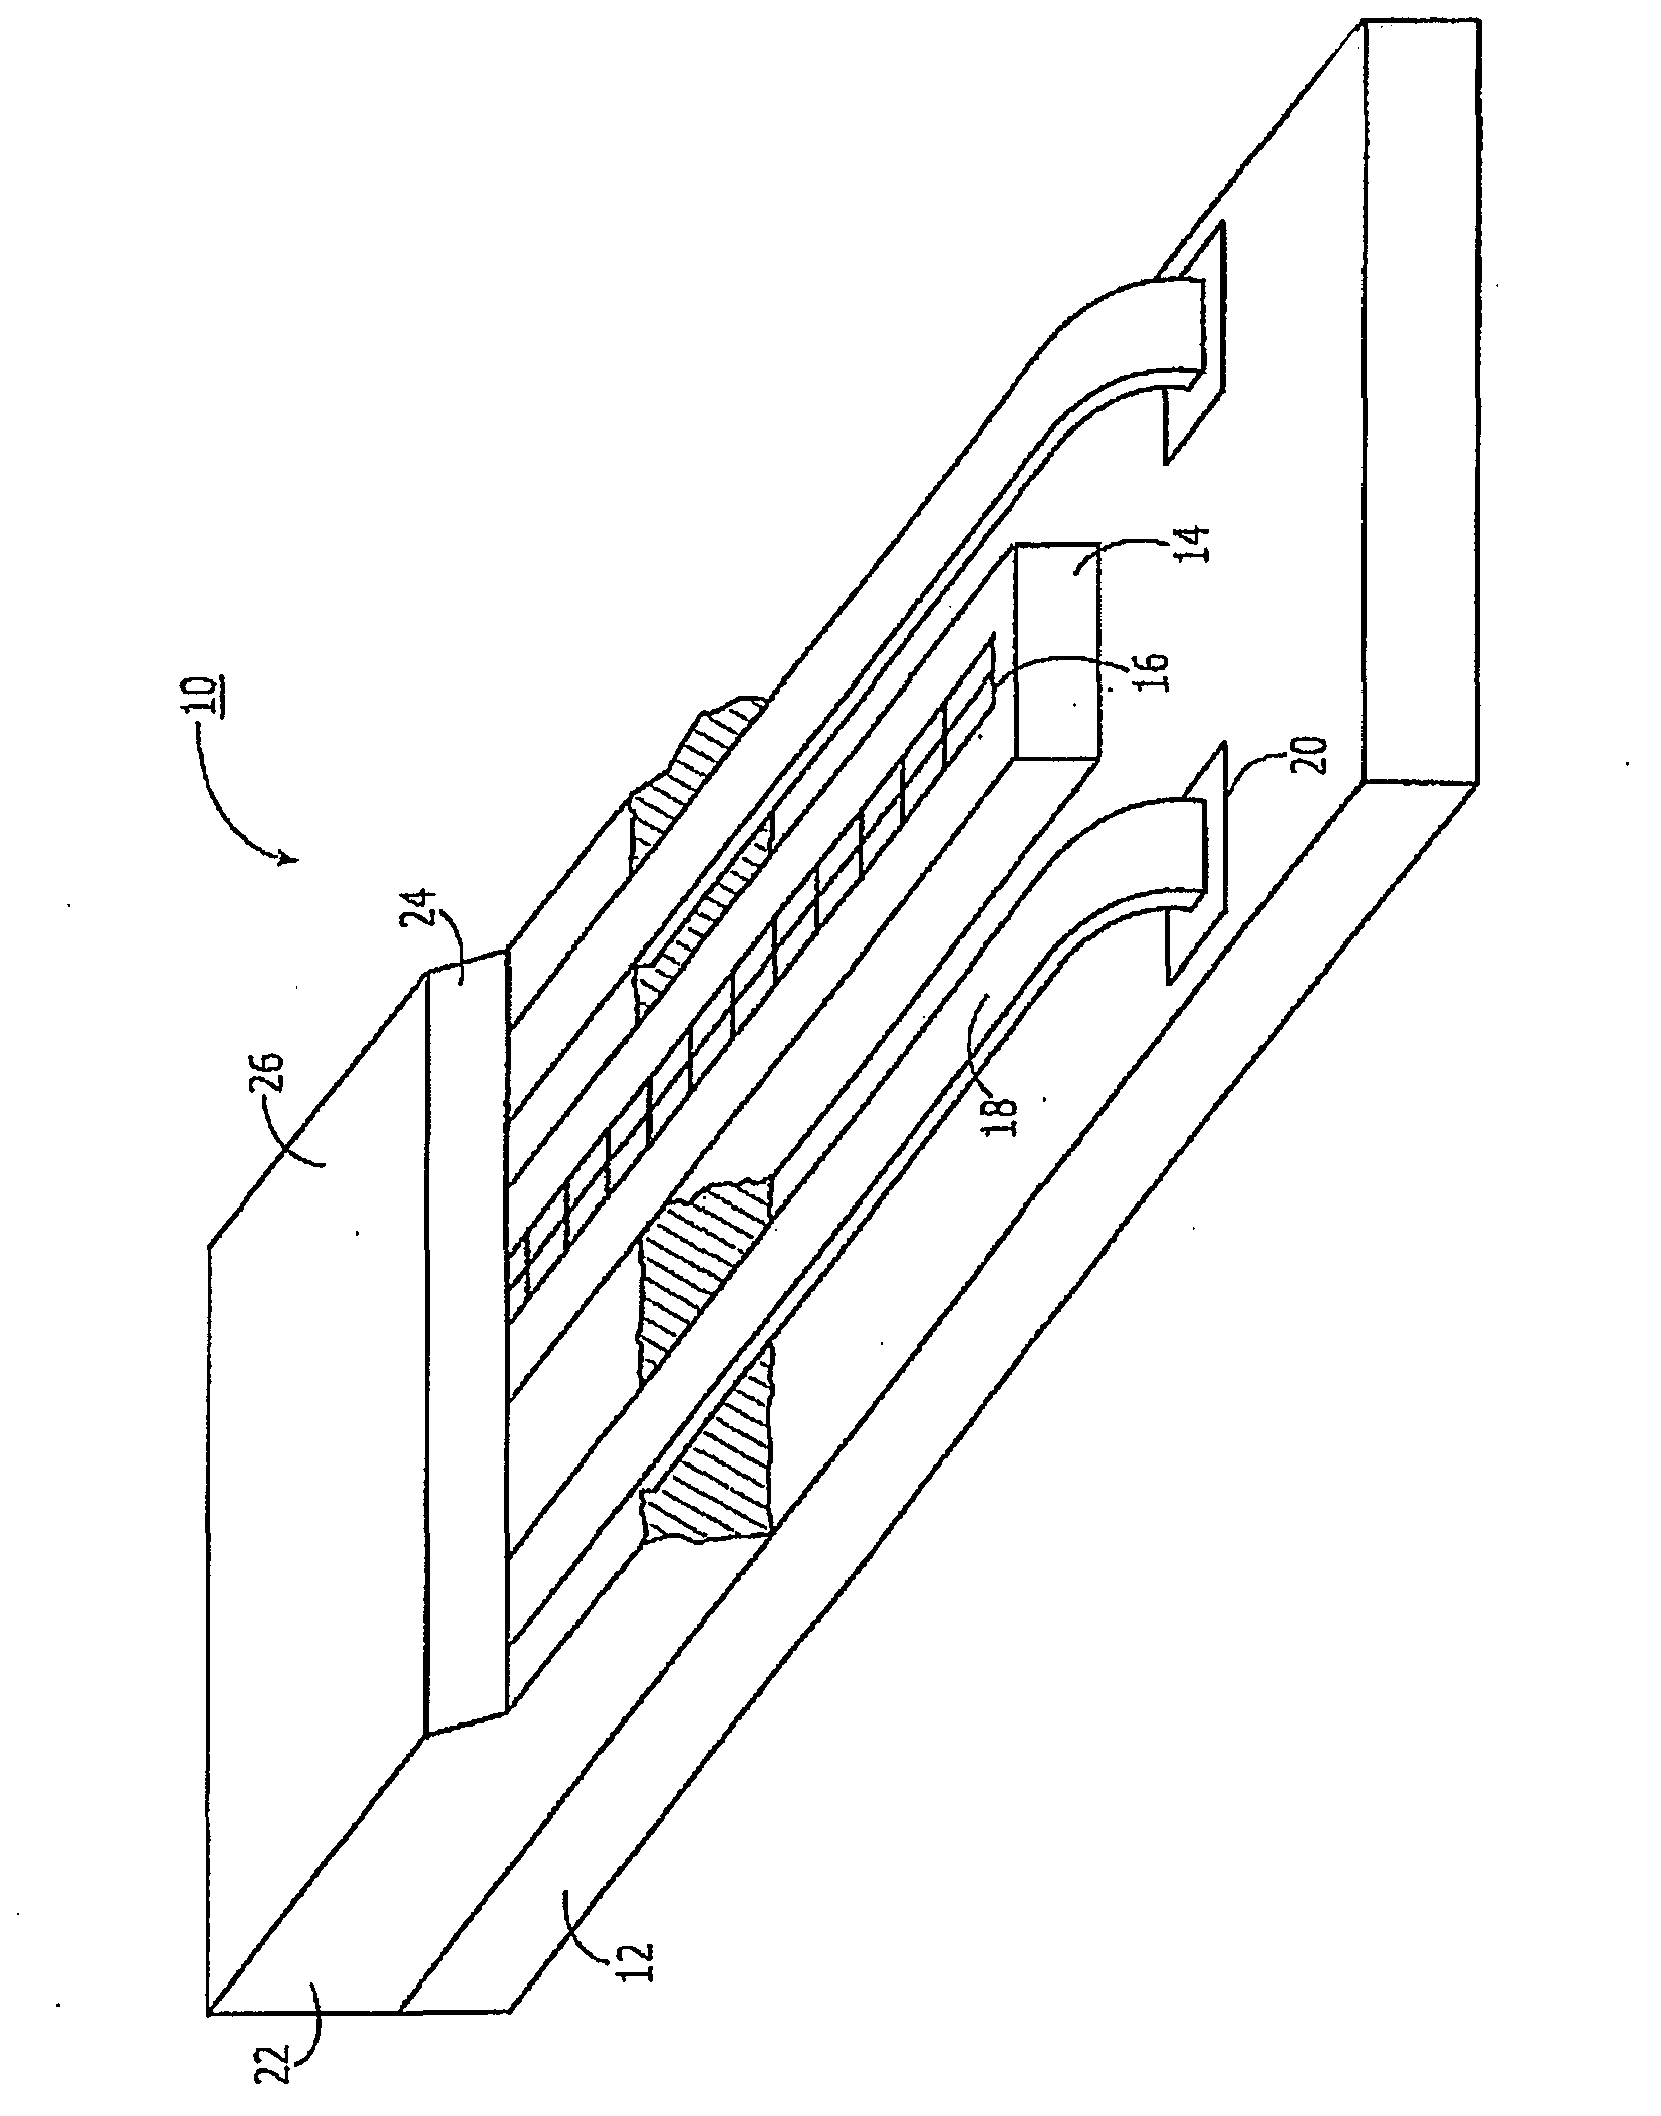 Integrally molded die and bezel structure for fingerprint sensors and the like